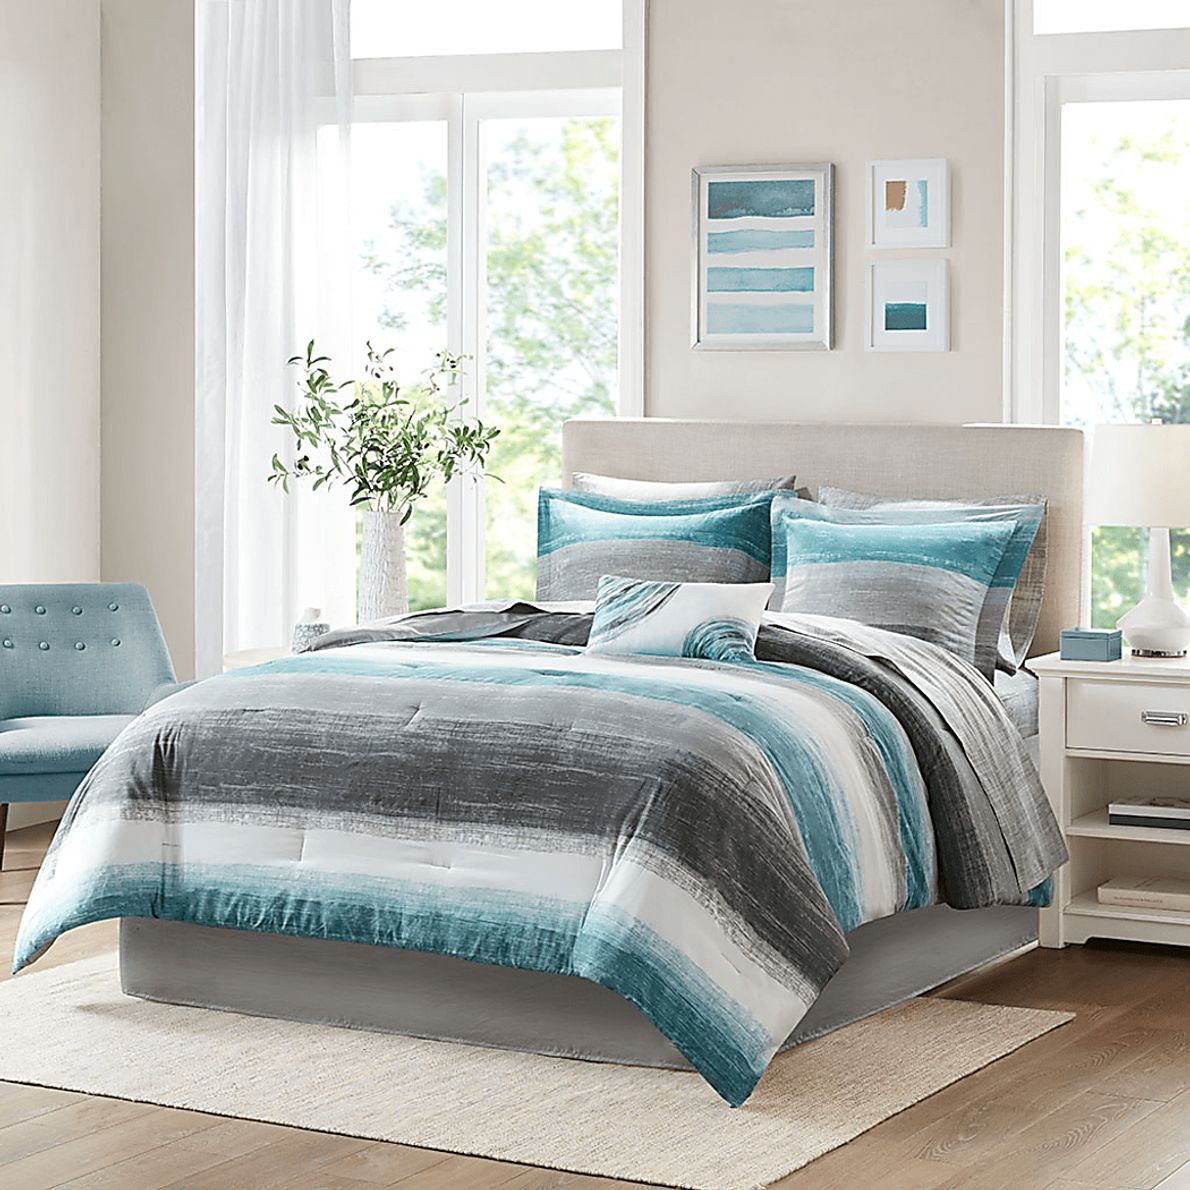 Paysee 7 Pc Twin Comforter Set